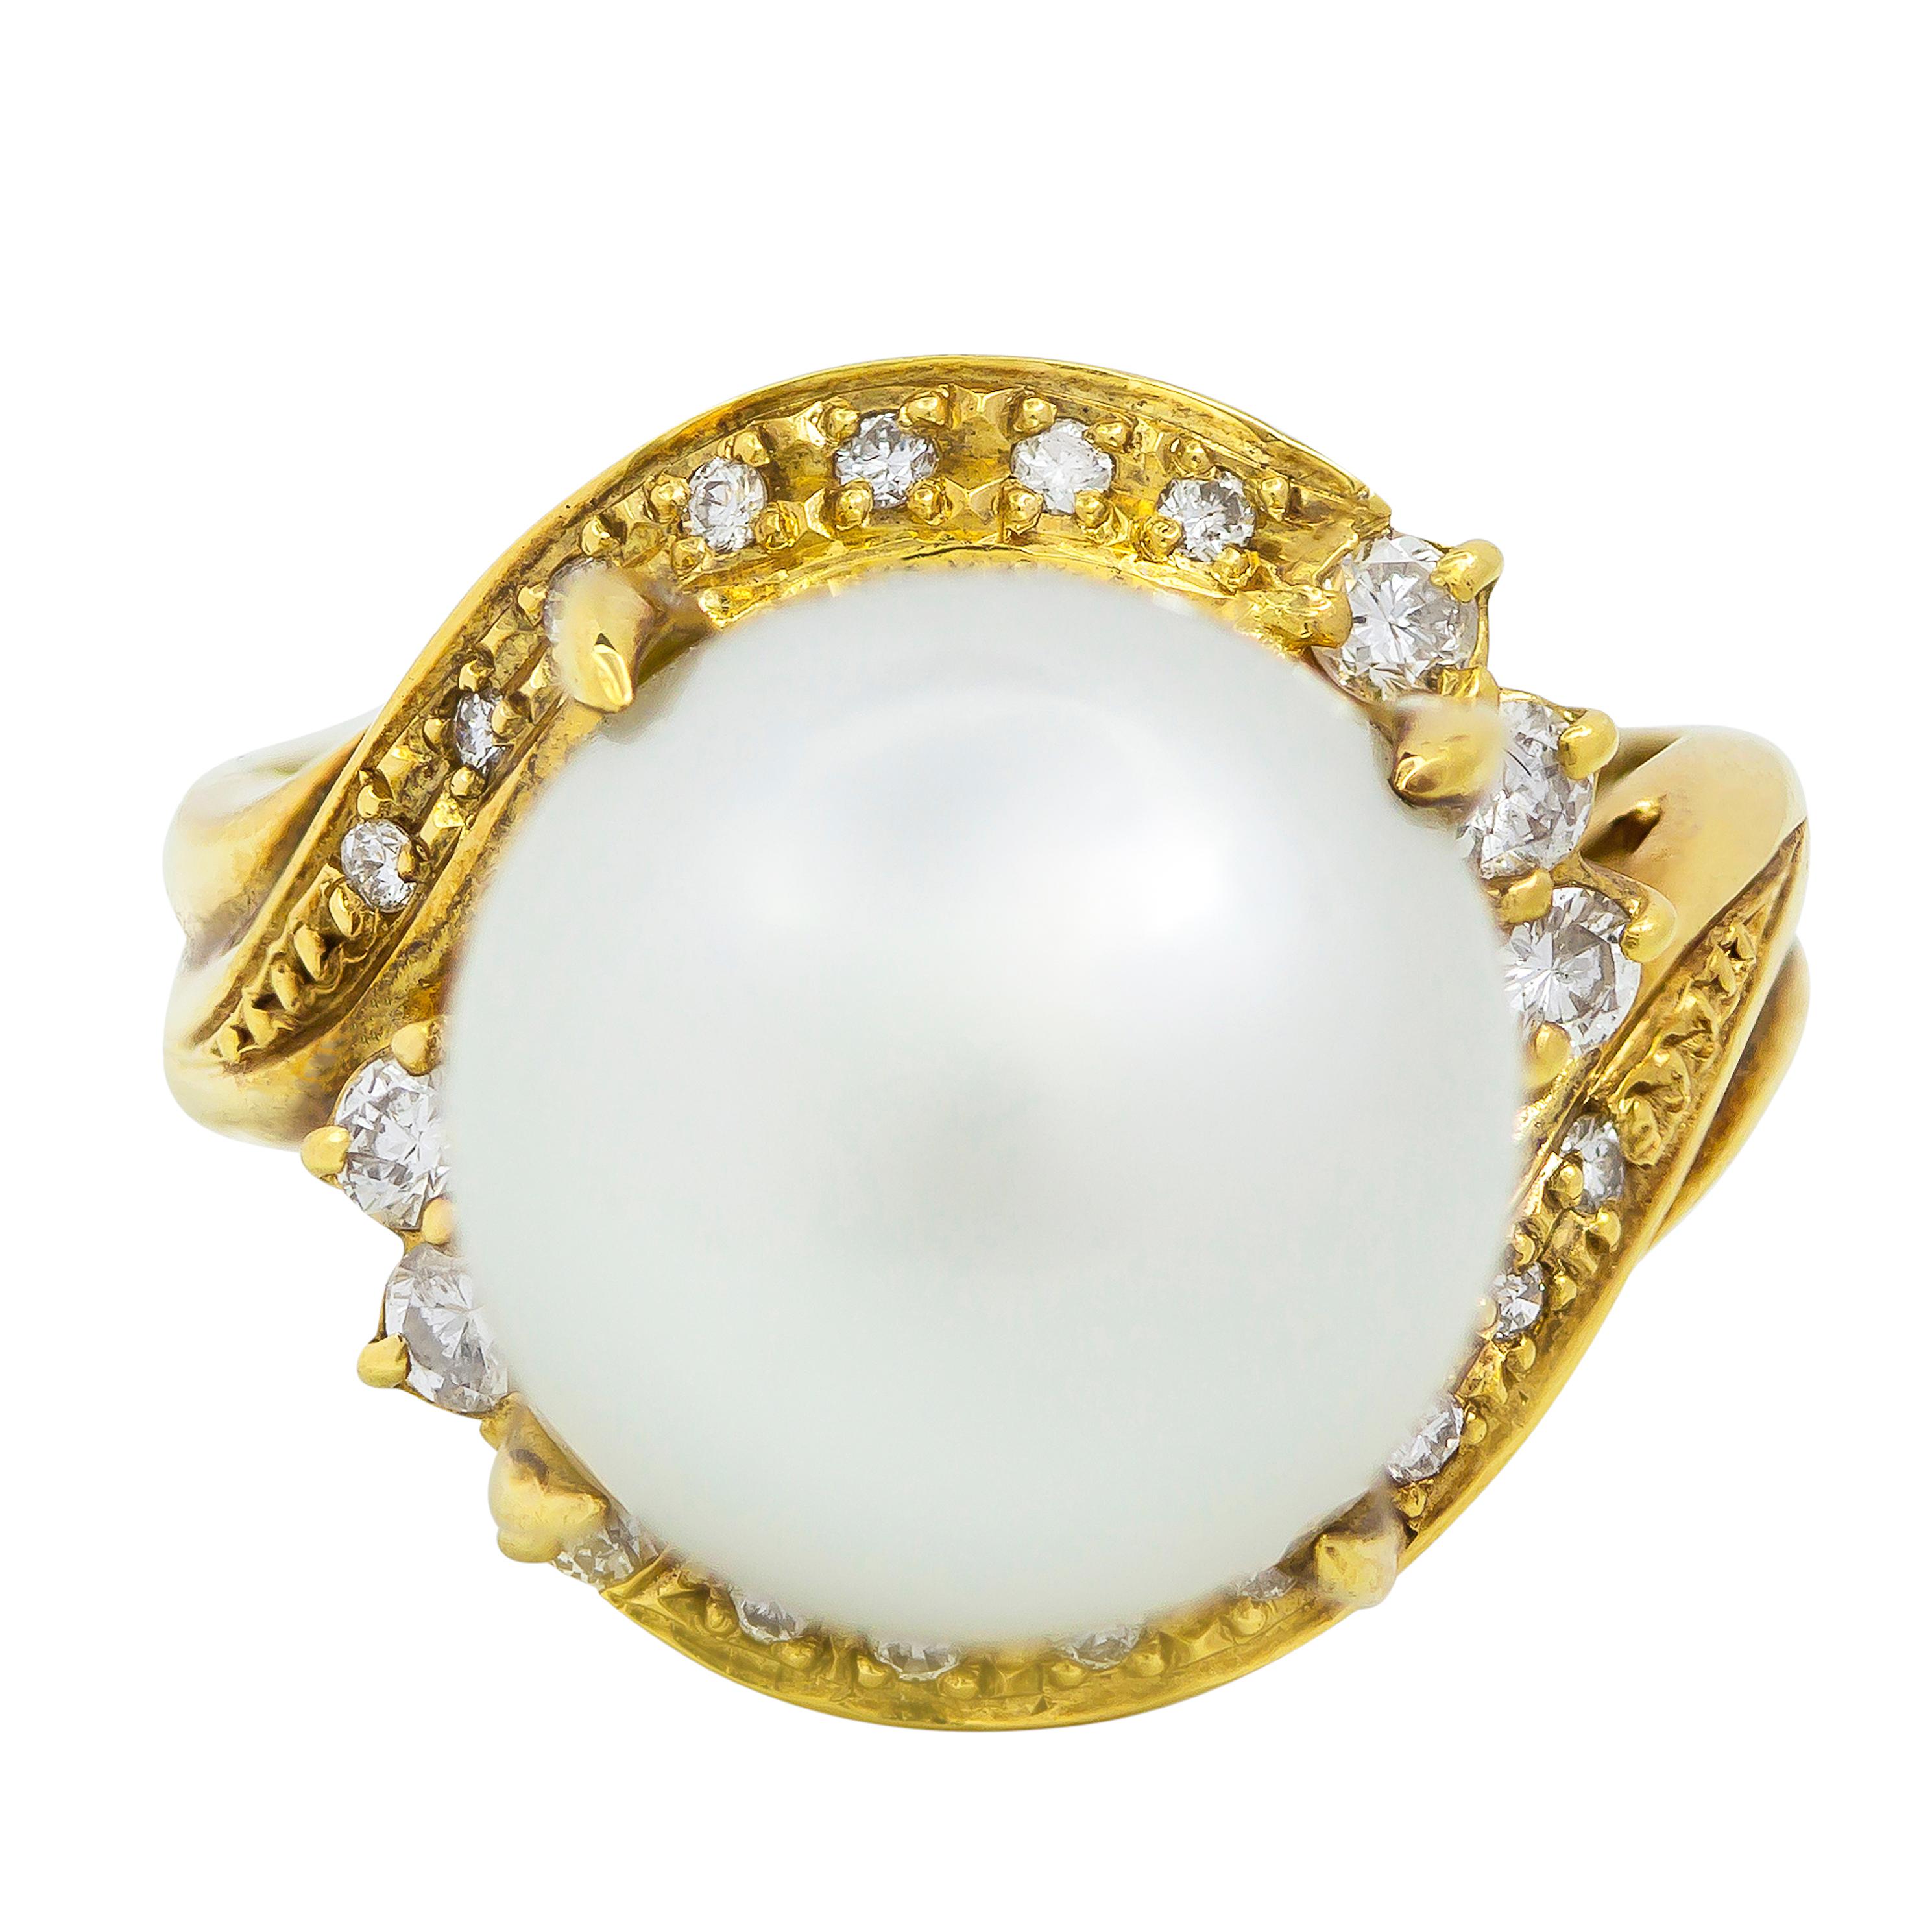 An antique and unique style engagement ring showcasing a single 11.60mm pearl center stone elegantly enclosed in a bypass design accented with sparkling round diamonds. Diamonds weigh approximately 0.09 carats total. Made with 18k yellow gold. Size